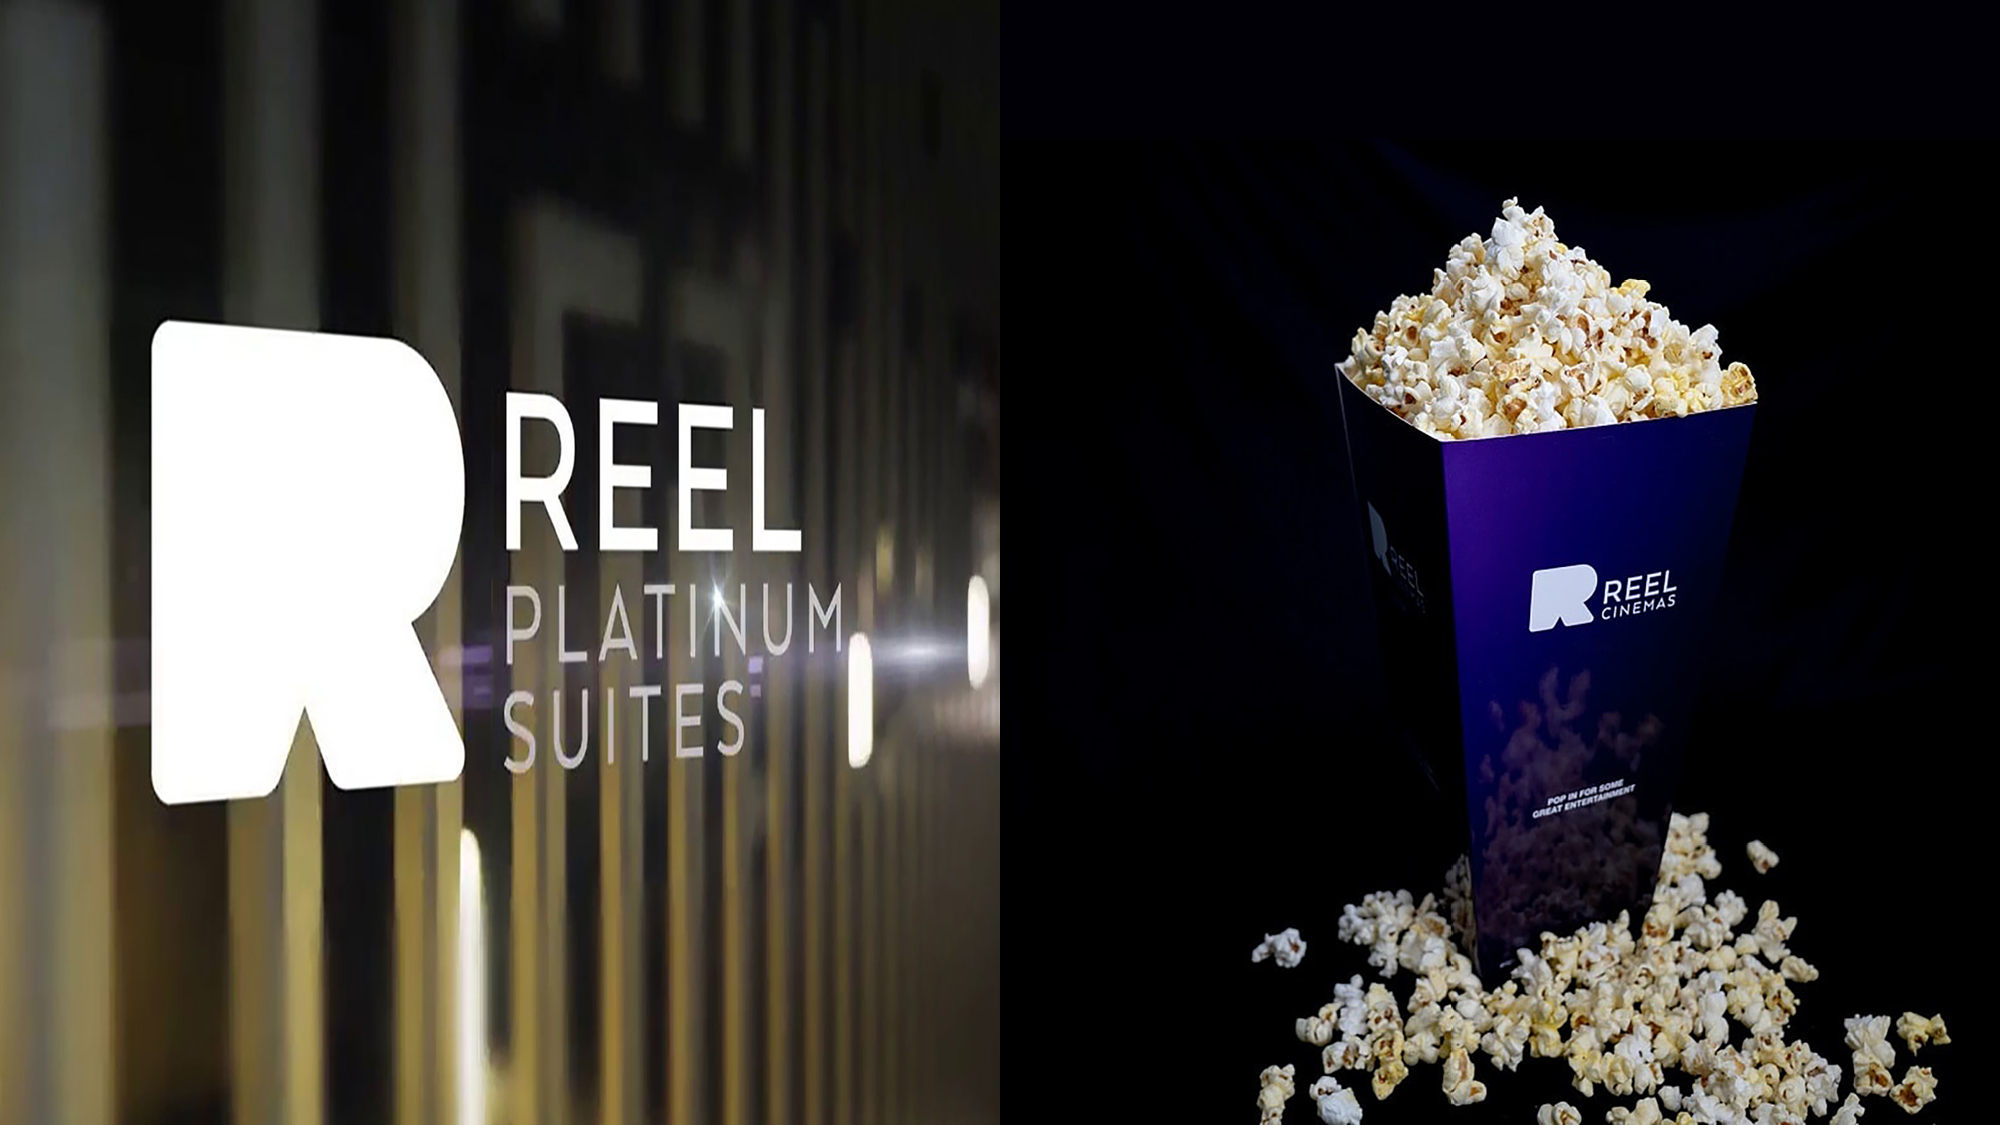 Entity-3-Three-Brand-Design-Agency-Sydney-Reel-Cinemas-10-experience-retail-environments-signage-packaging